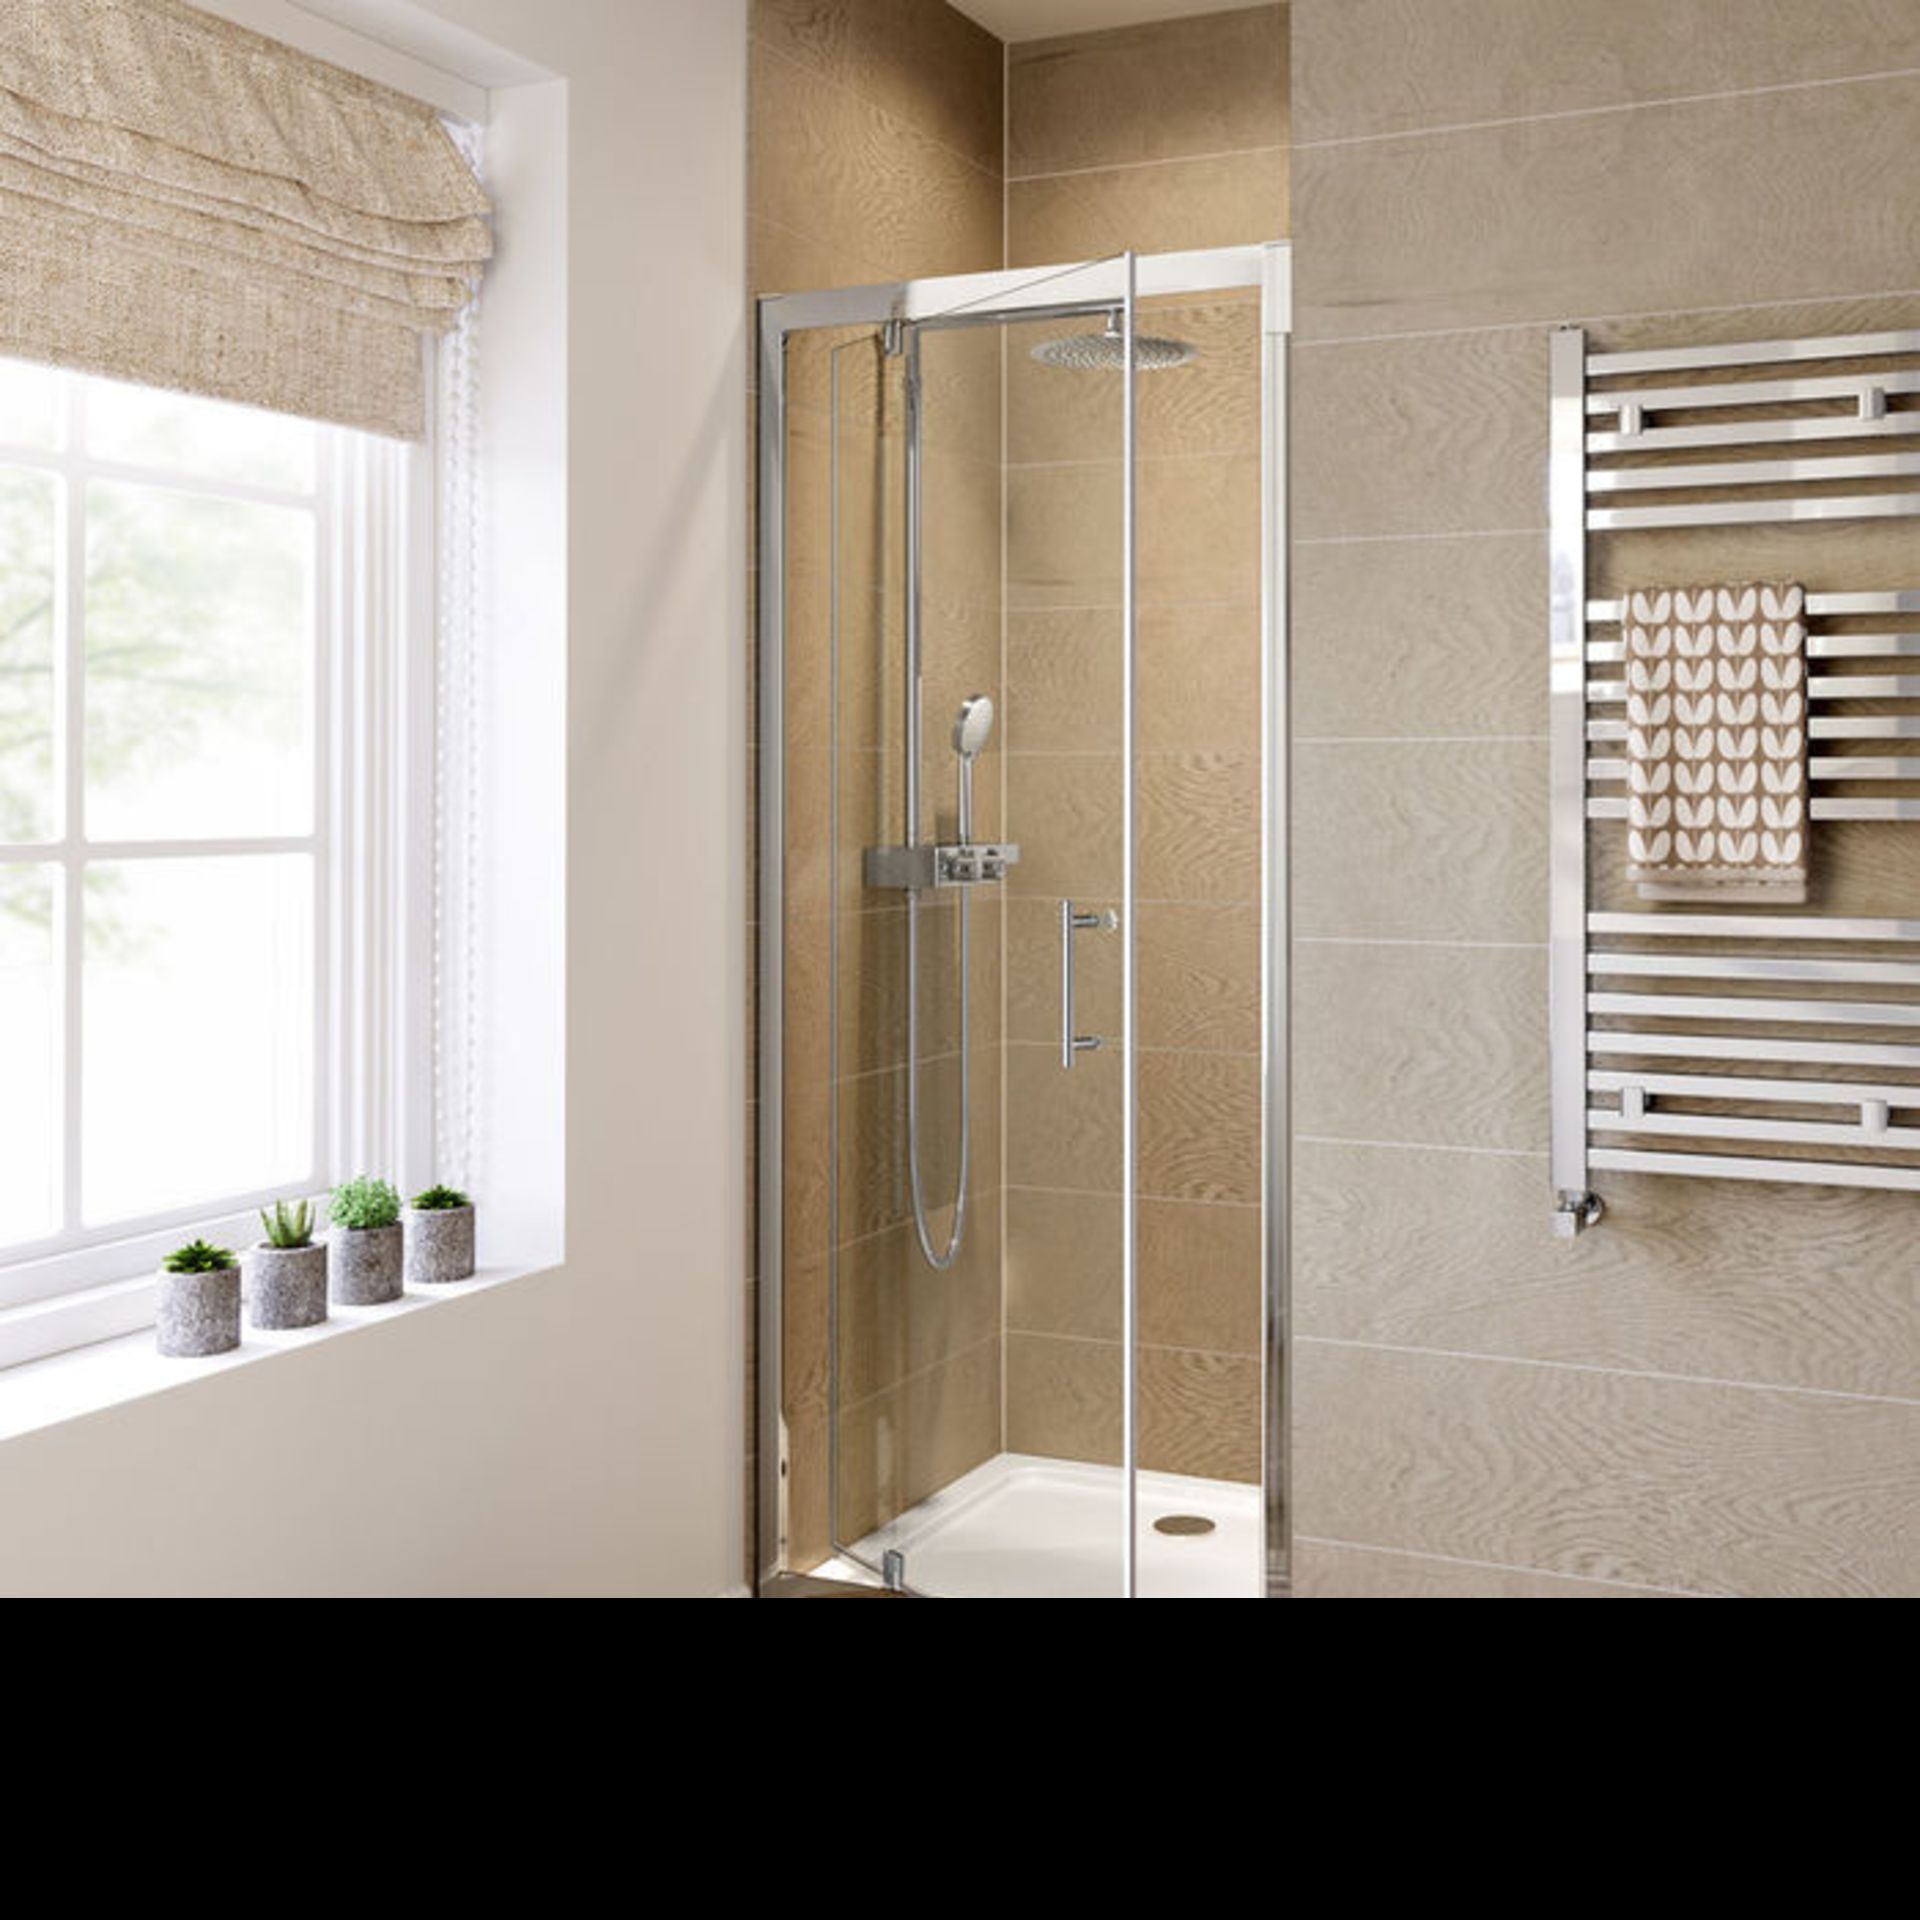 New Twyford's 700mm - 6mm - Premium Pivot Shower Door. RRP £299.99.8mm Safety Glass Fully Wat... - Image 2 of 2